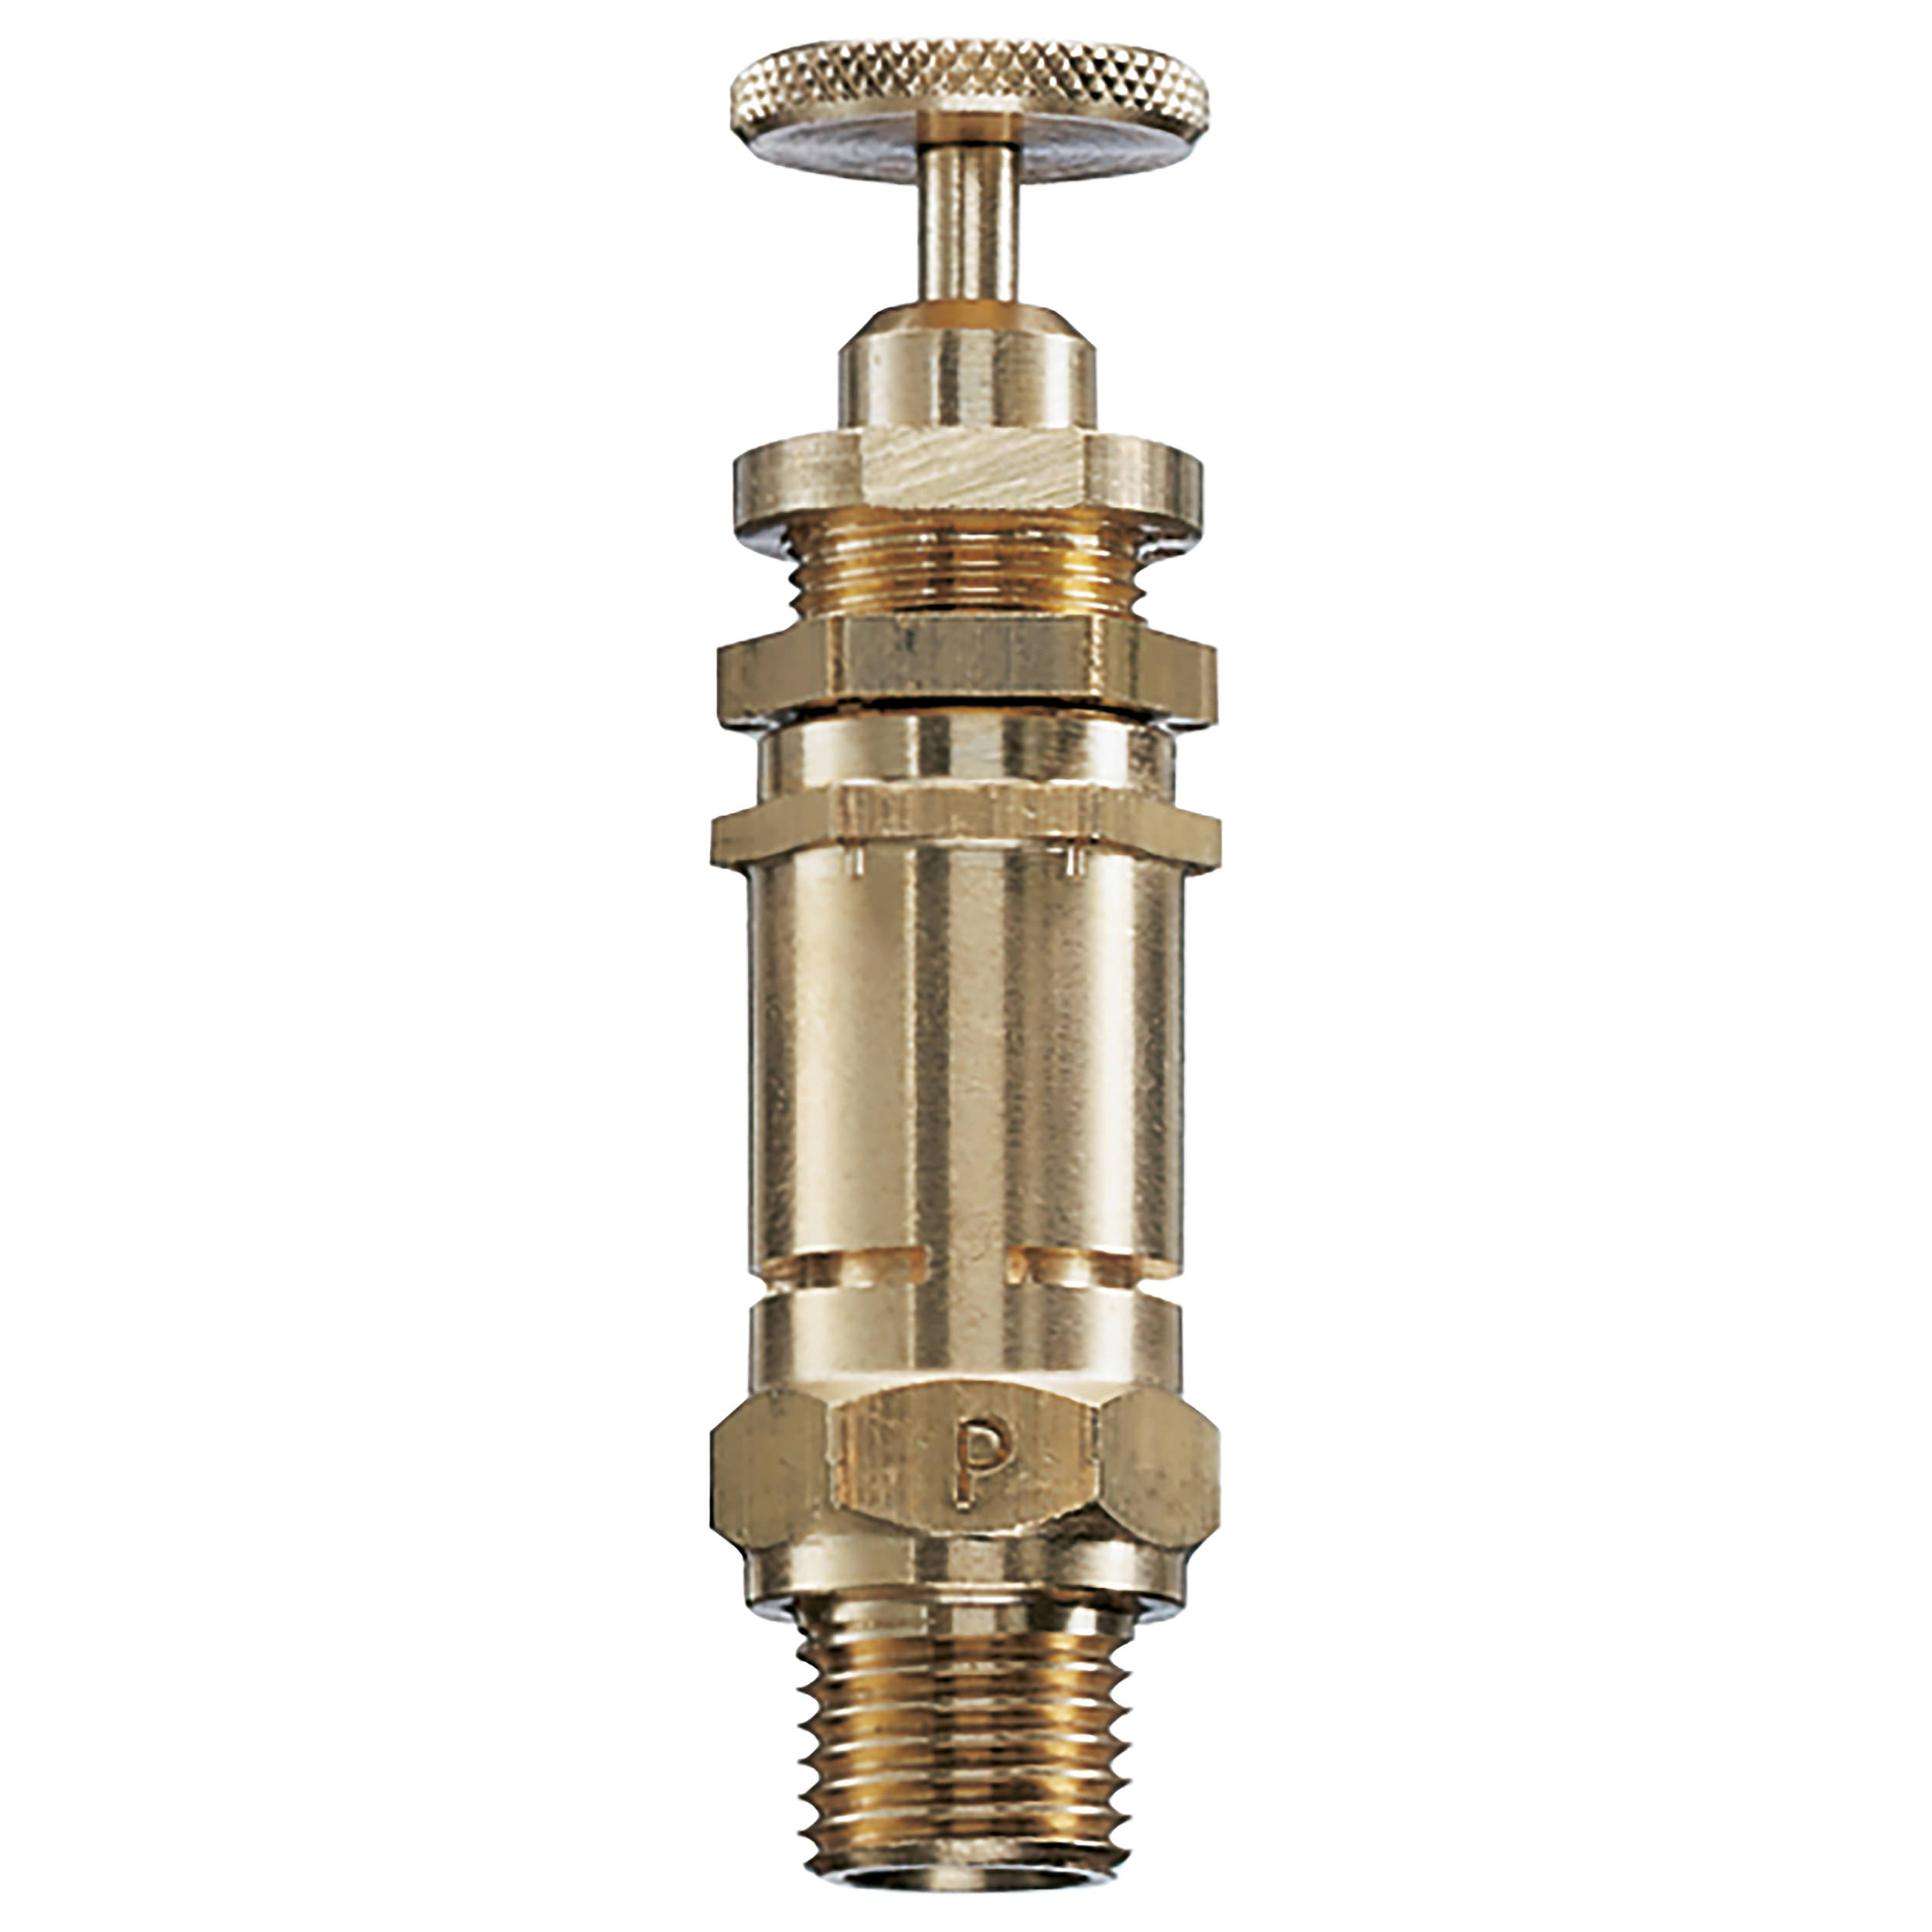 Blow-off valve DN 6, G ¼, set pressure: 7.5 bar (109 psi), seal: metal, not component tested